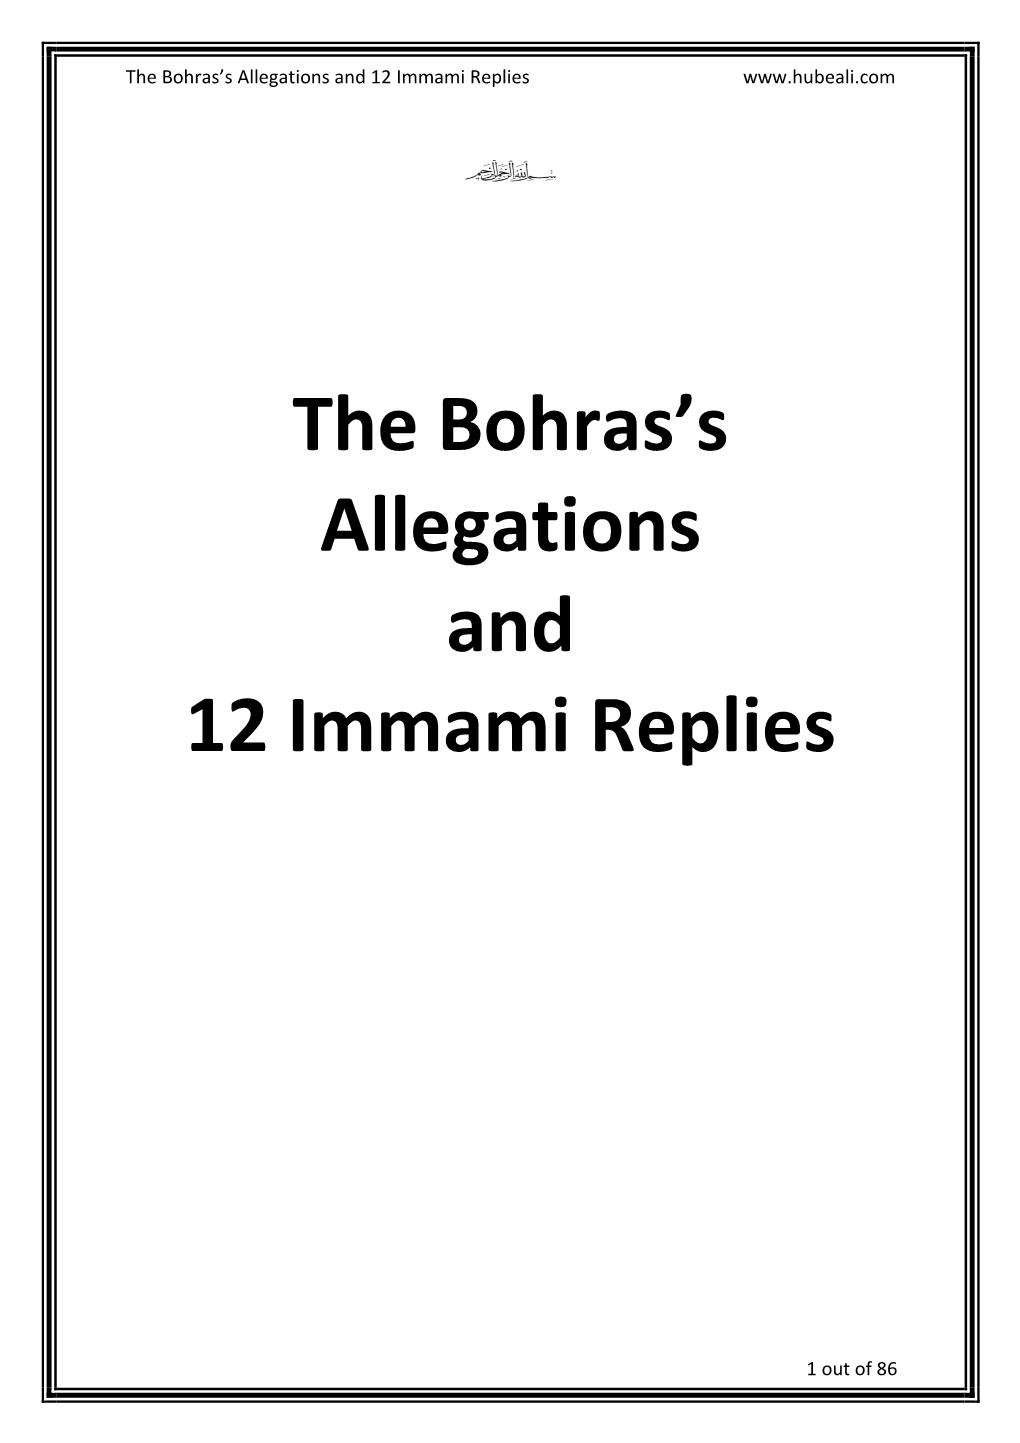 Bohras's Allegations and 12 Immami Replies